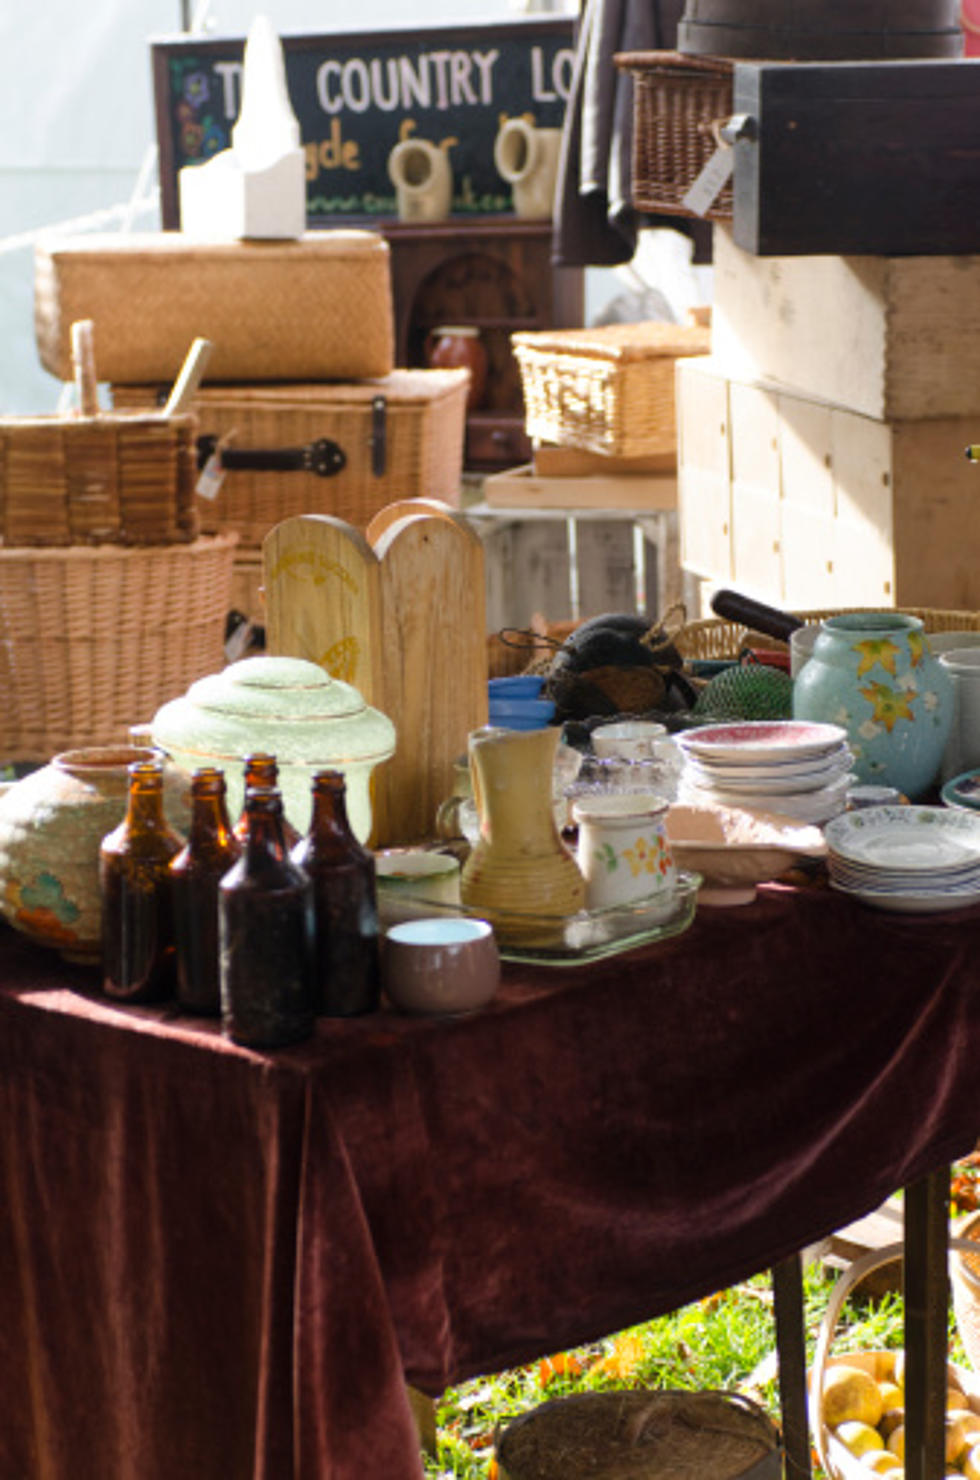 2015 Little Bear Antique Fair is This Weekend at the Fairgrounds